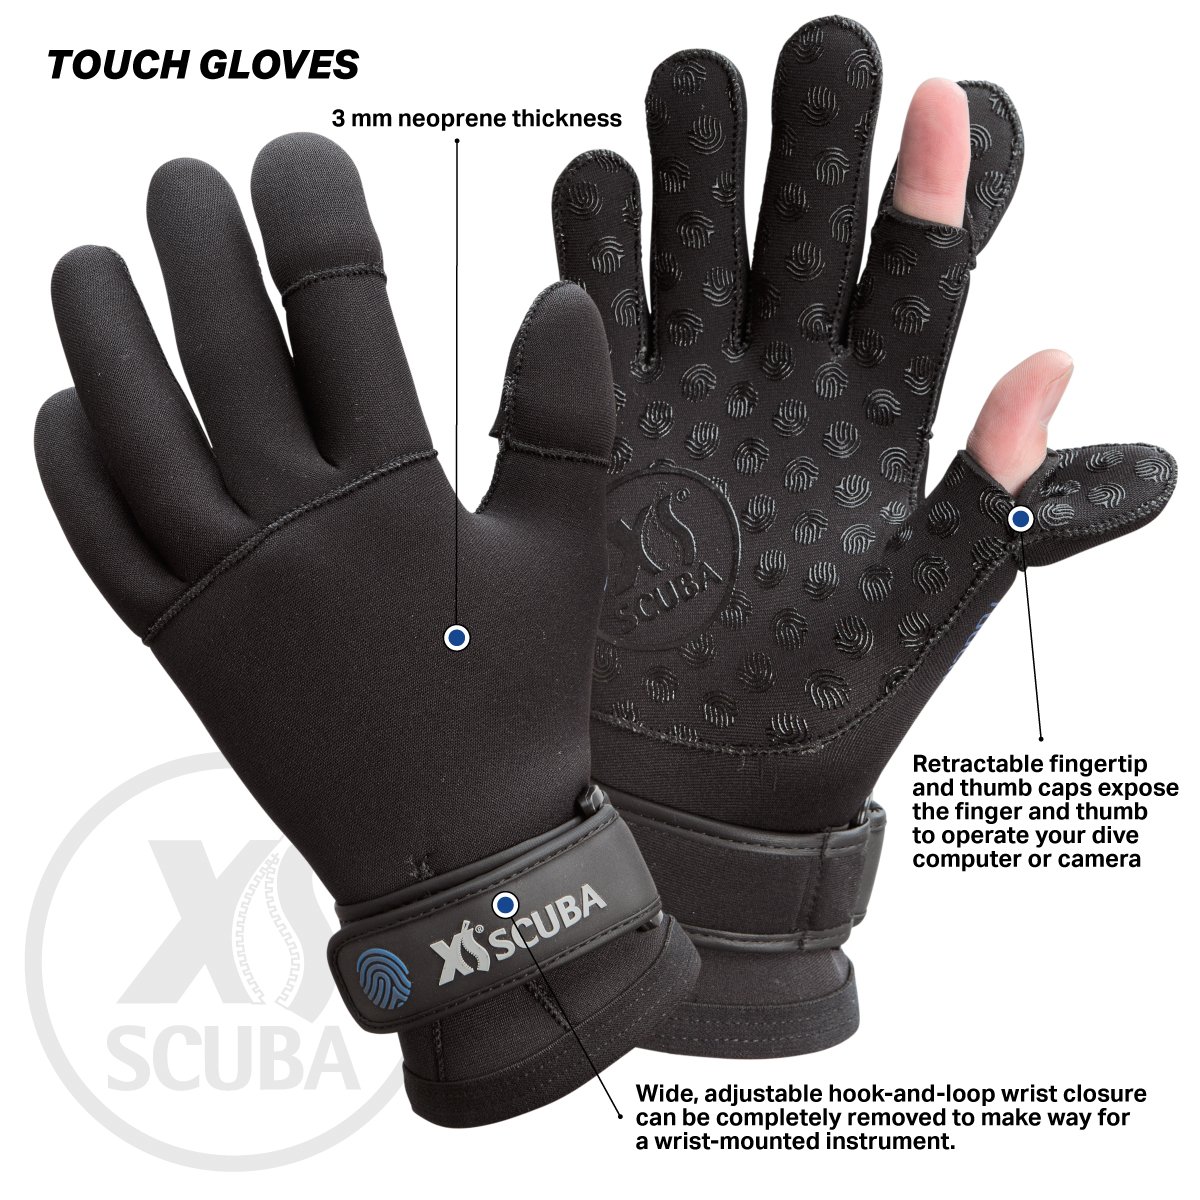 Gloves — XS Scuba - Everything For The Perfect Dive